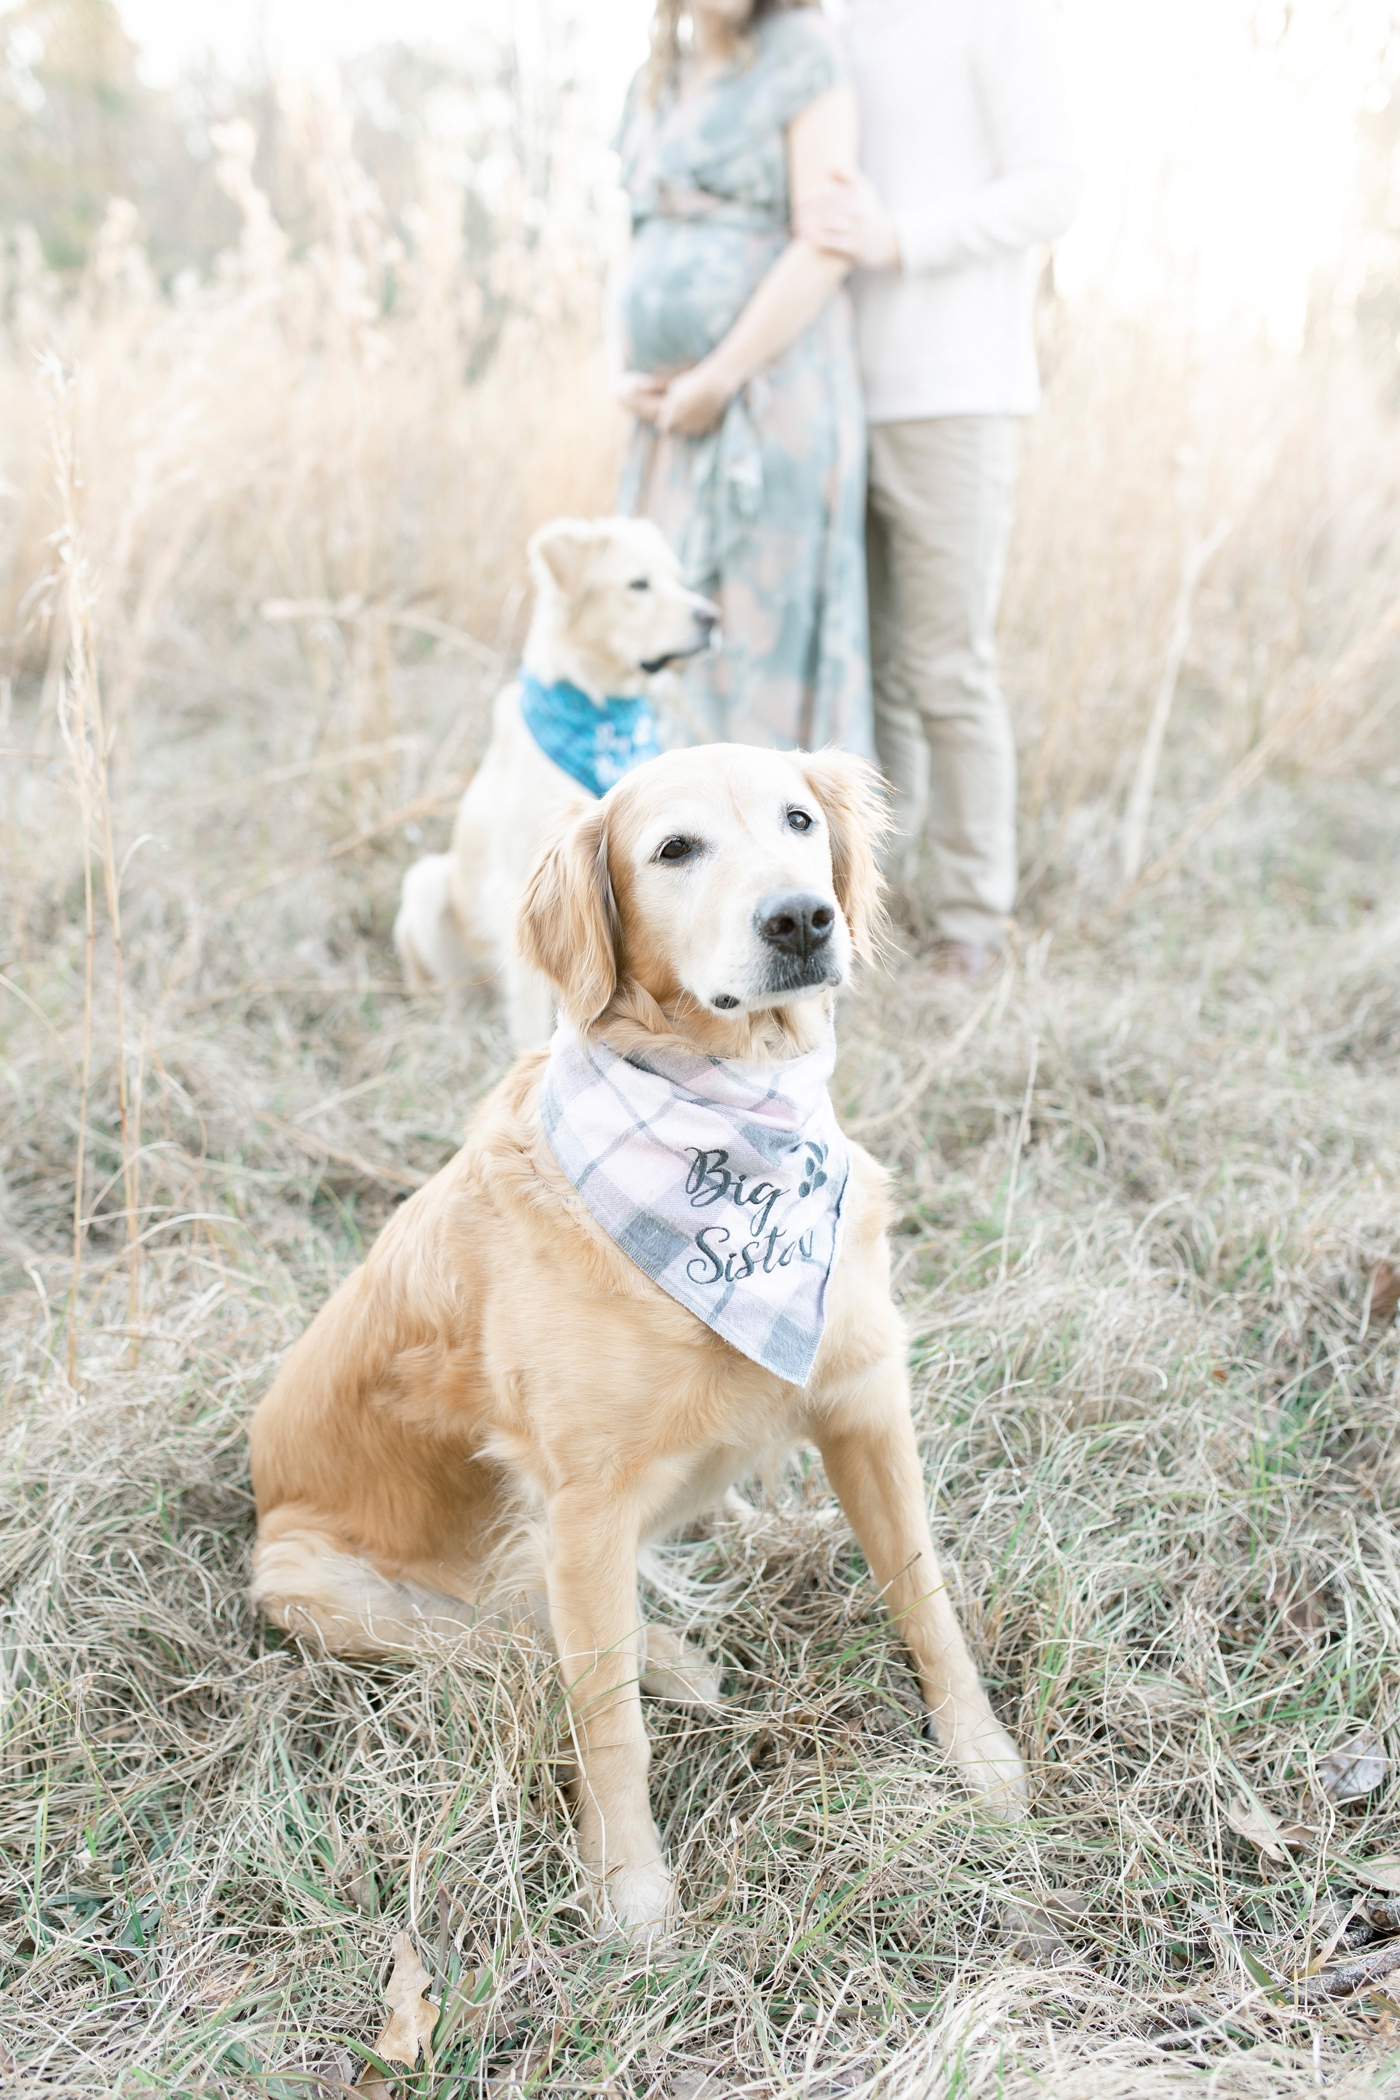 Family's dogs with big brother and sister bandanas. Photo by Little Sunshine Photography.